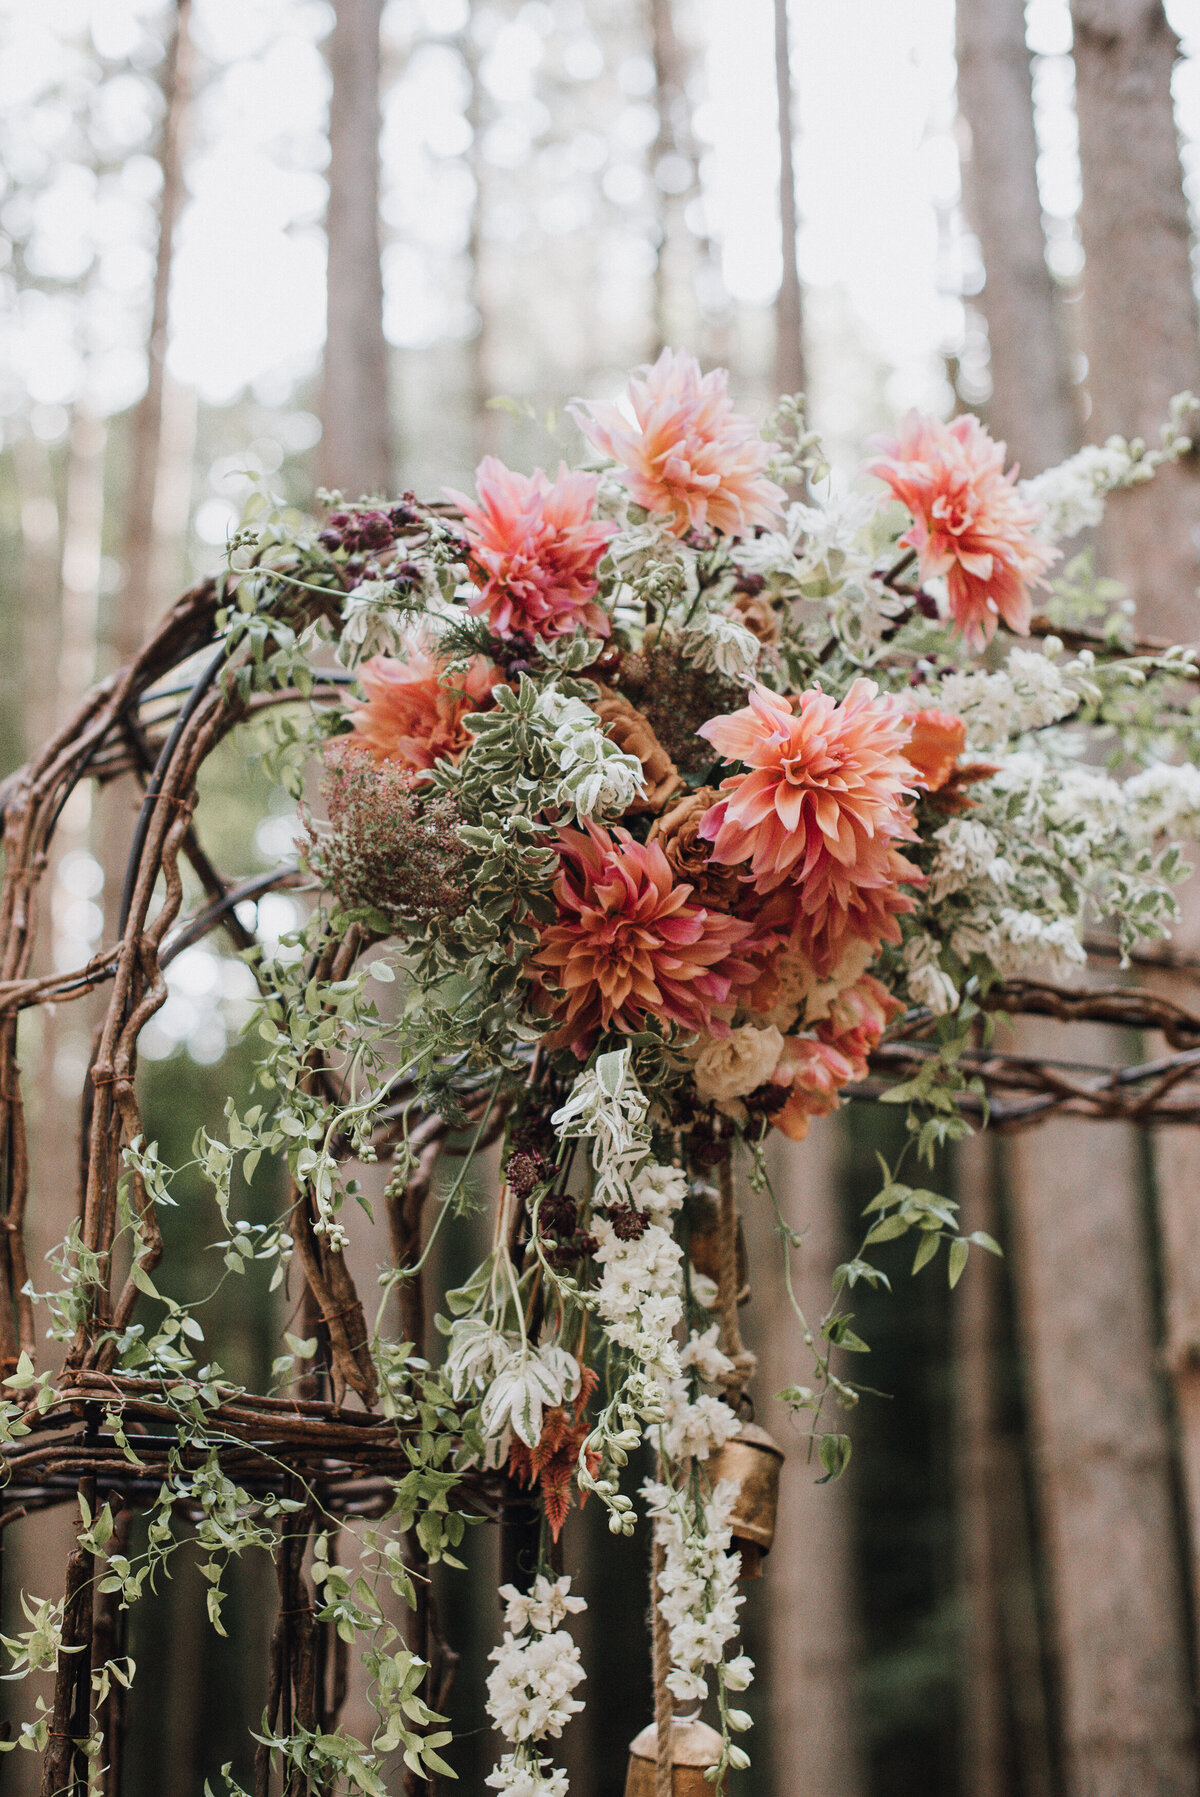 Detail of a wicker wedding arbor with copper dahlias , white larkspur, and greenery standing in a forest